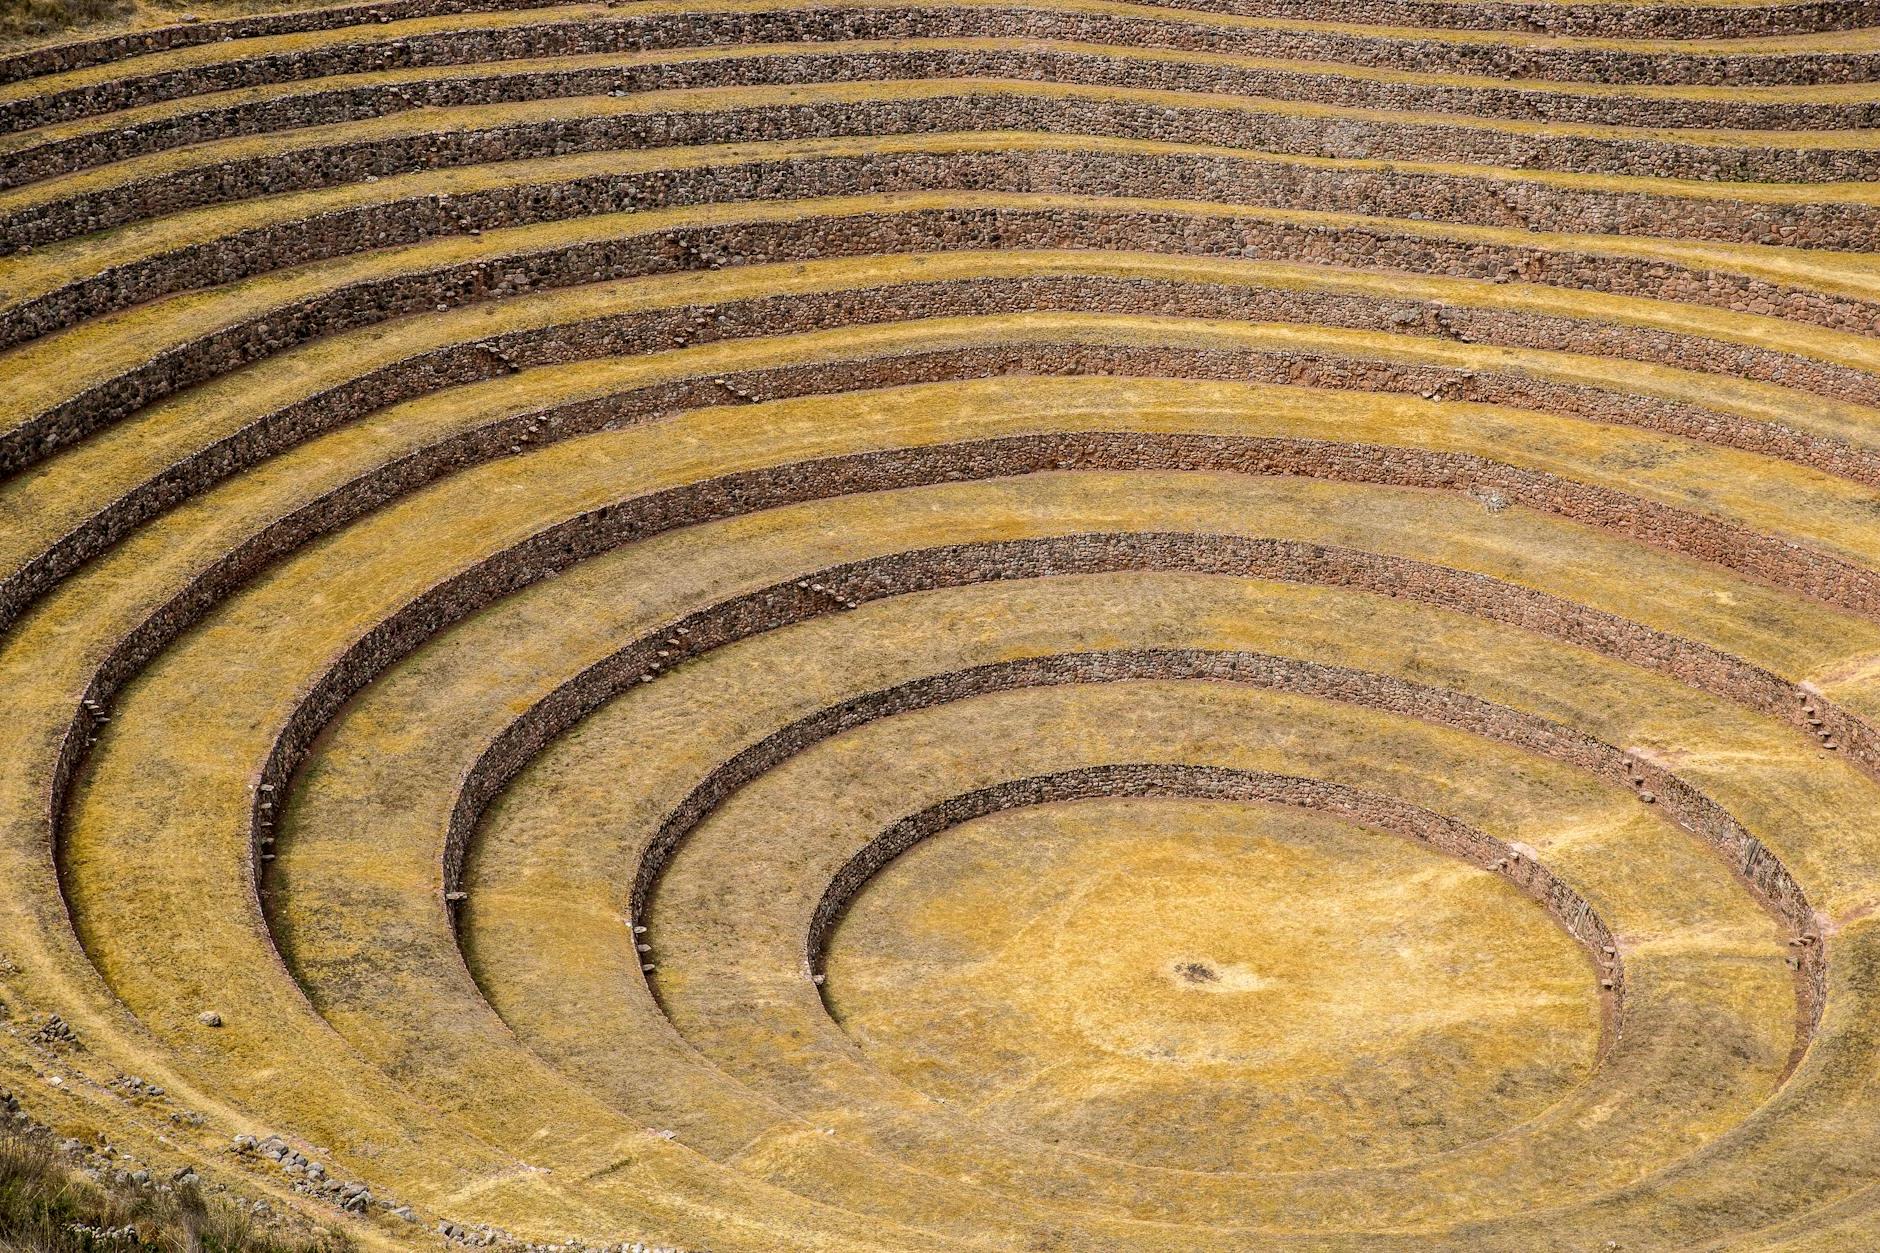 Inca Agriculture Terraces in Moray